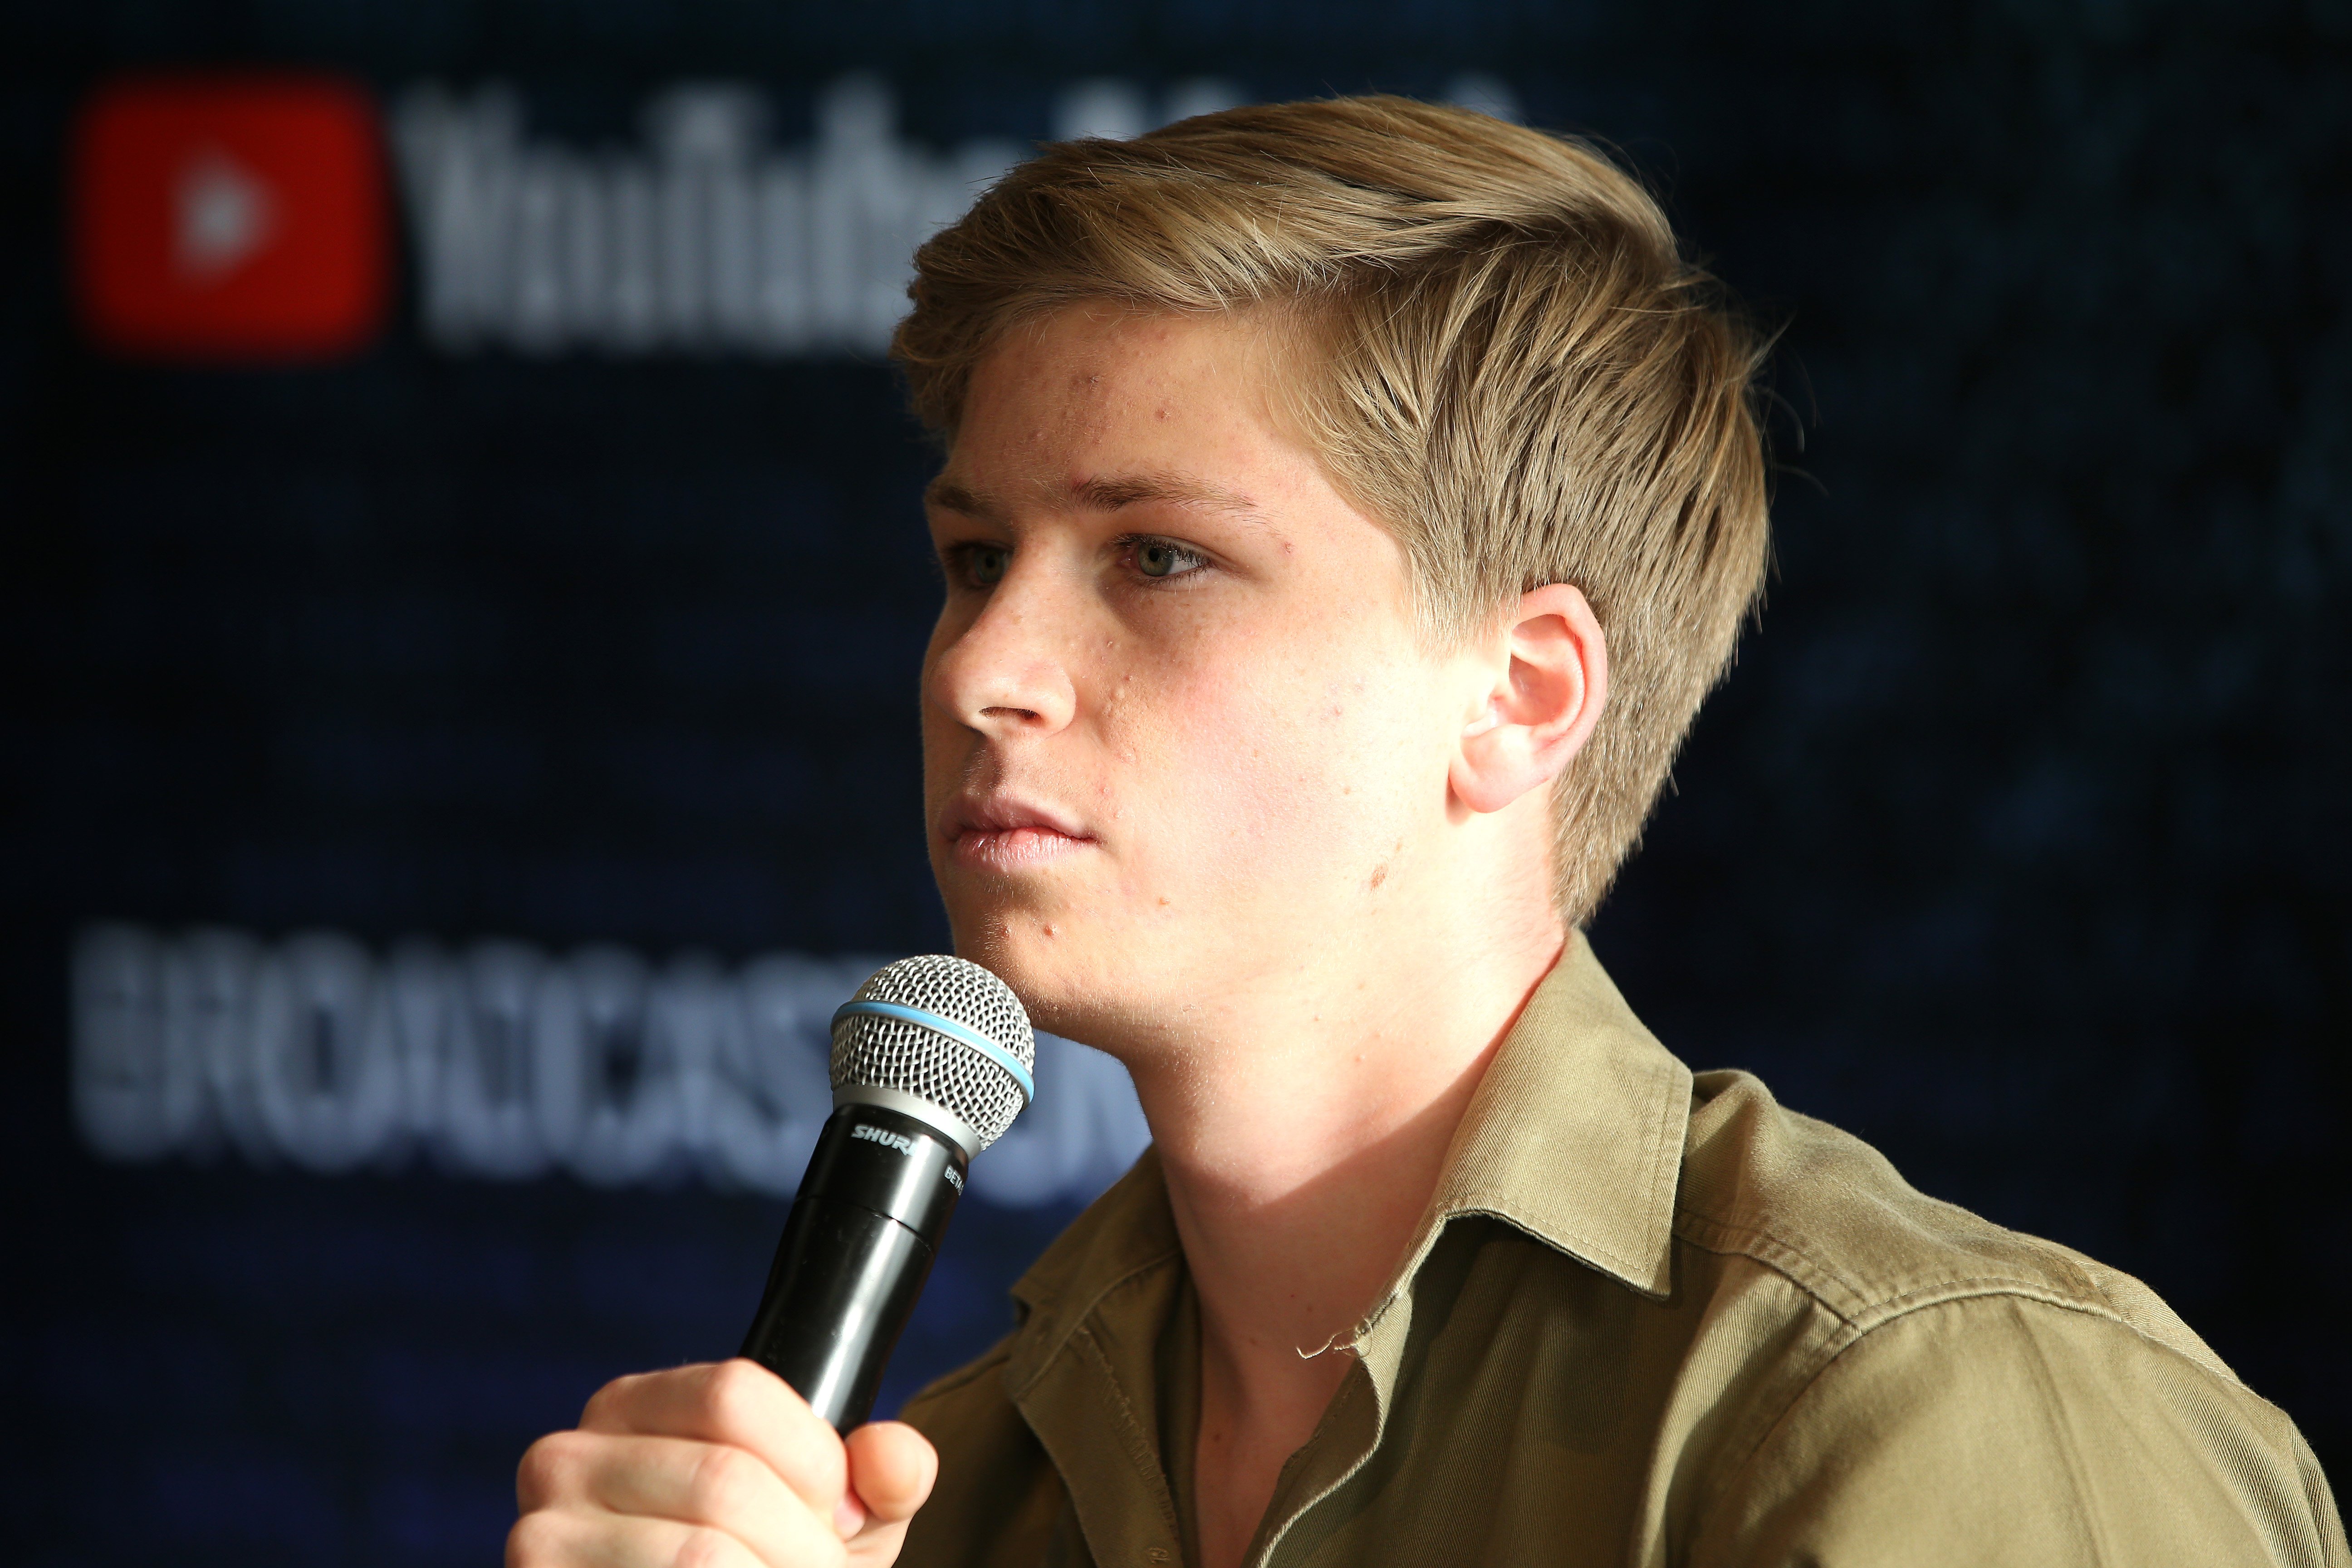 Robert Irwin talks to the media in the awards room during the 33rd Annual ARIA Awards 2019 | Photo: Getty Images